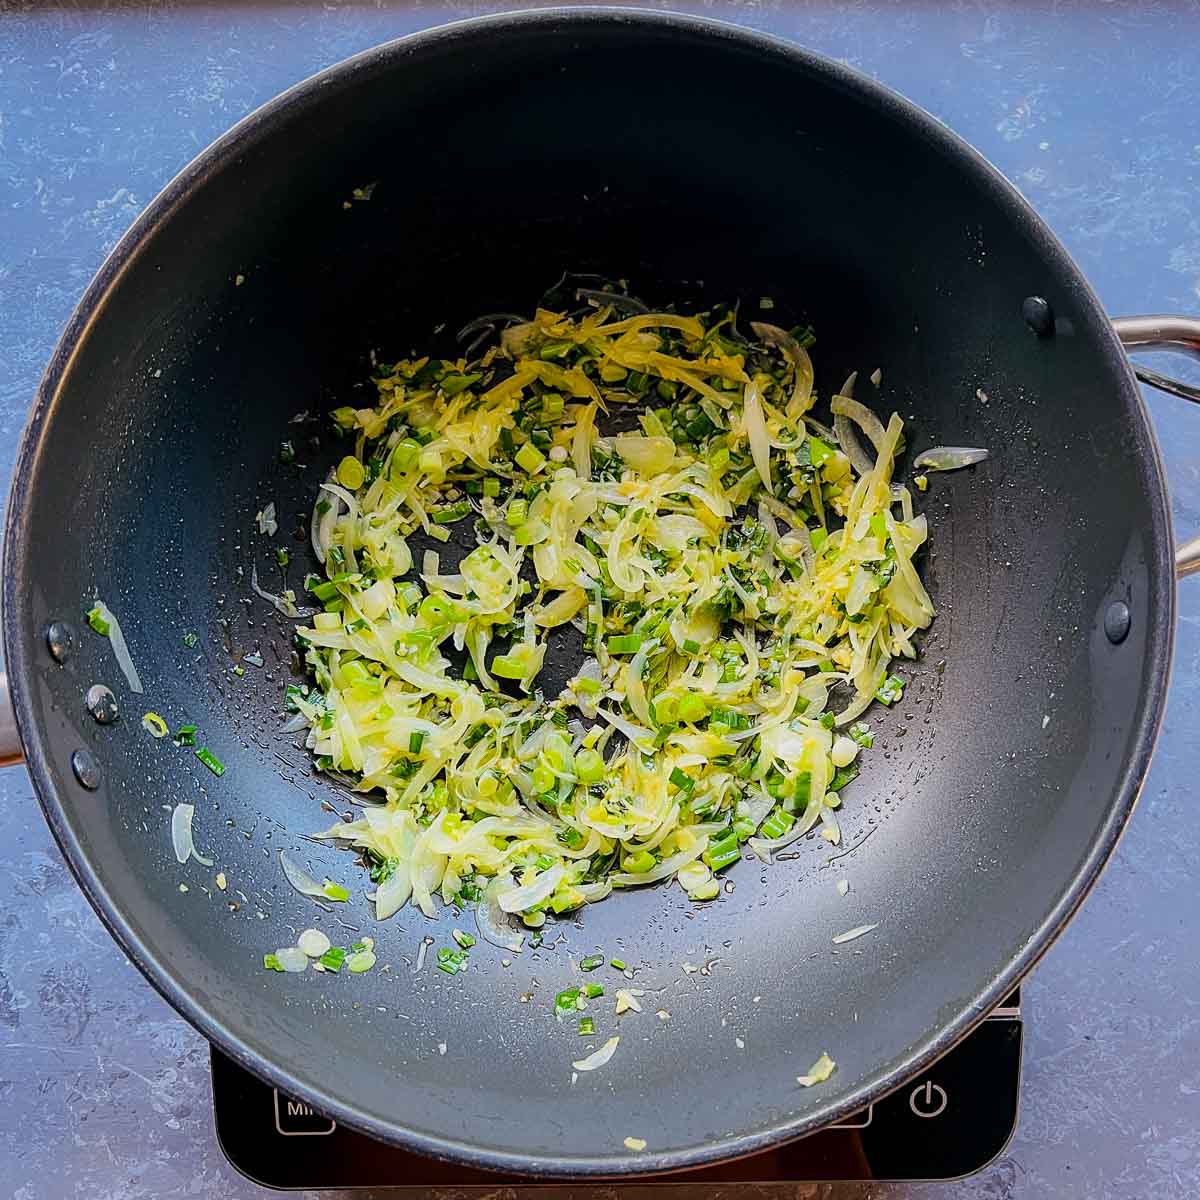 Sauted onion, ginger, garlic, and scallion in a large frying pan.